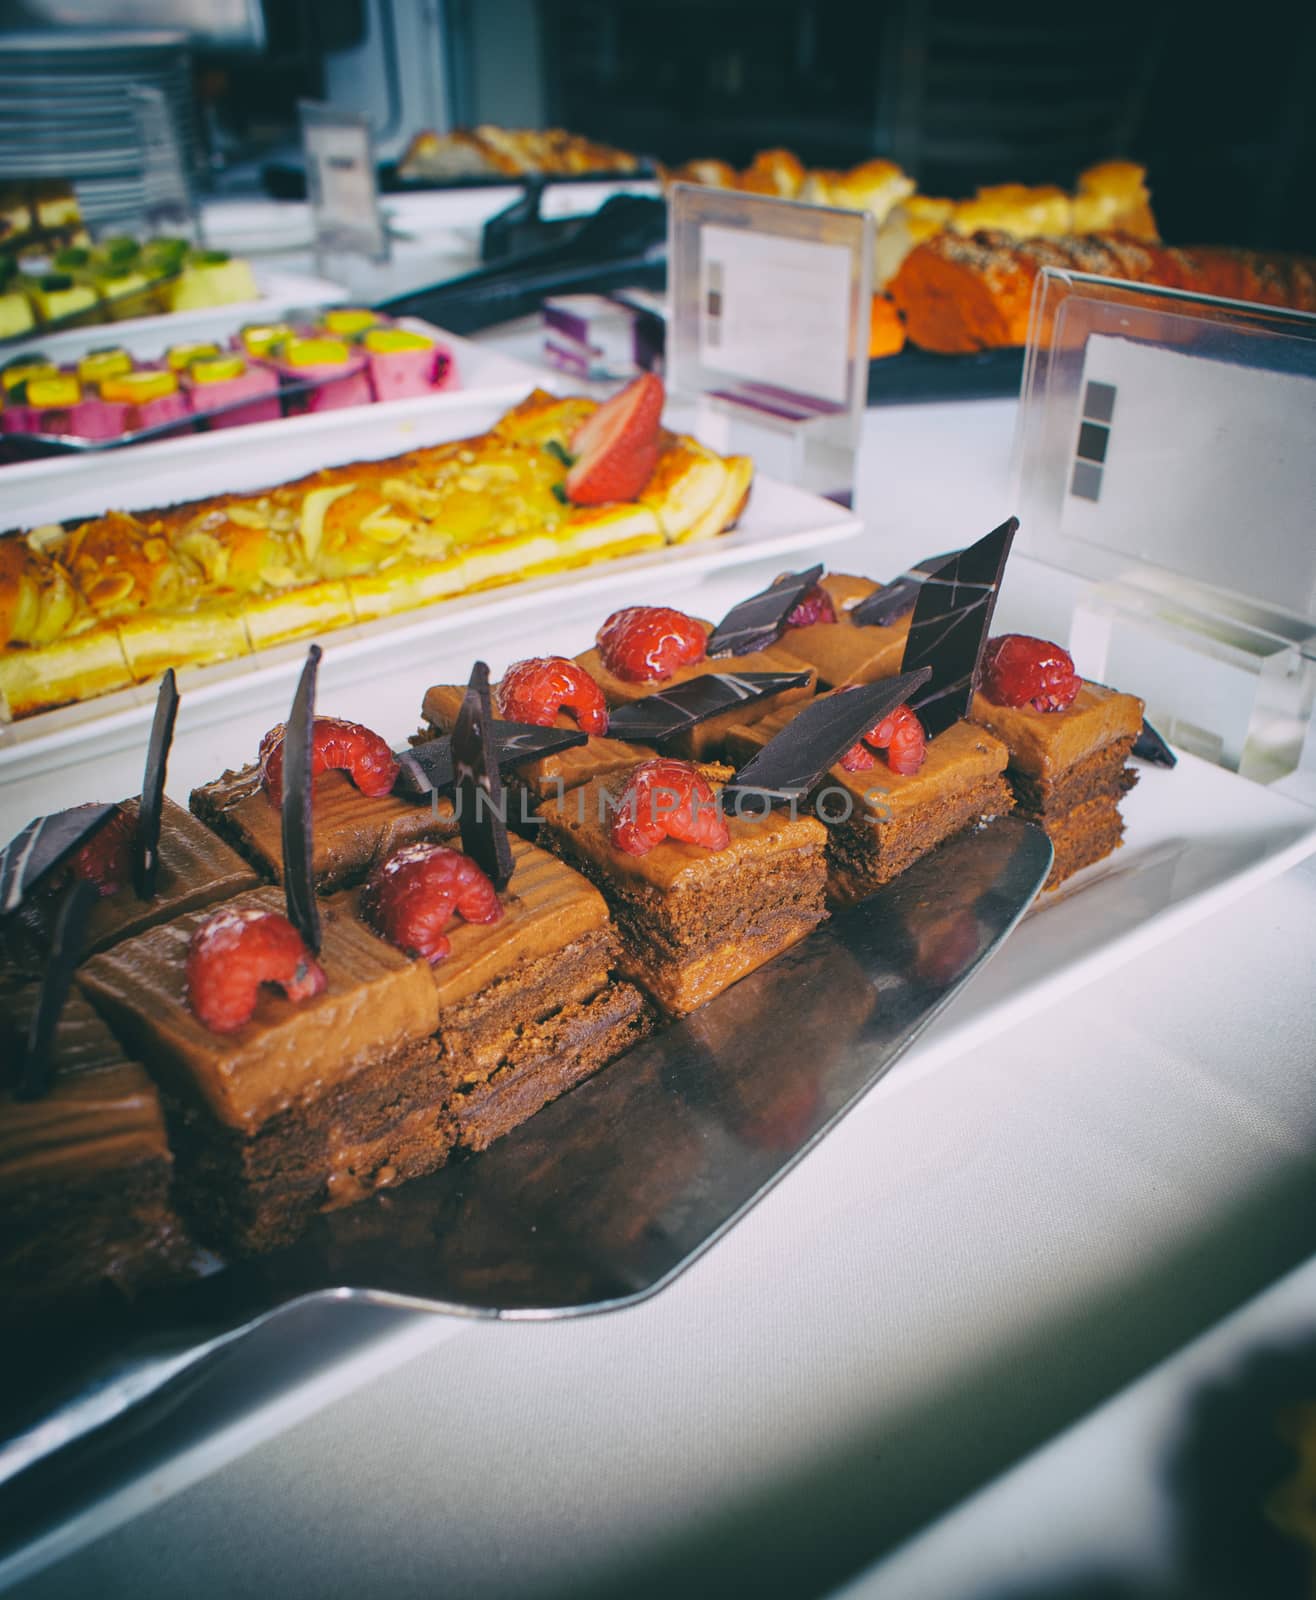 Photograph of a chocolate and strawberry dessert on a table with other fruit desserts